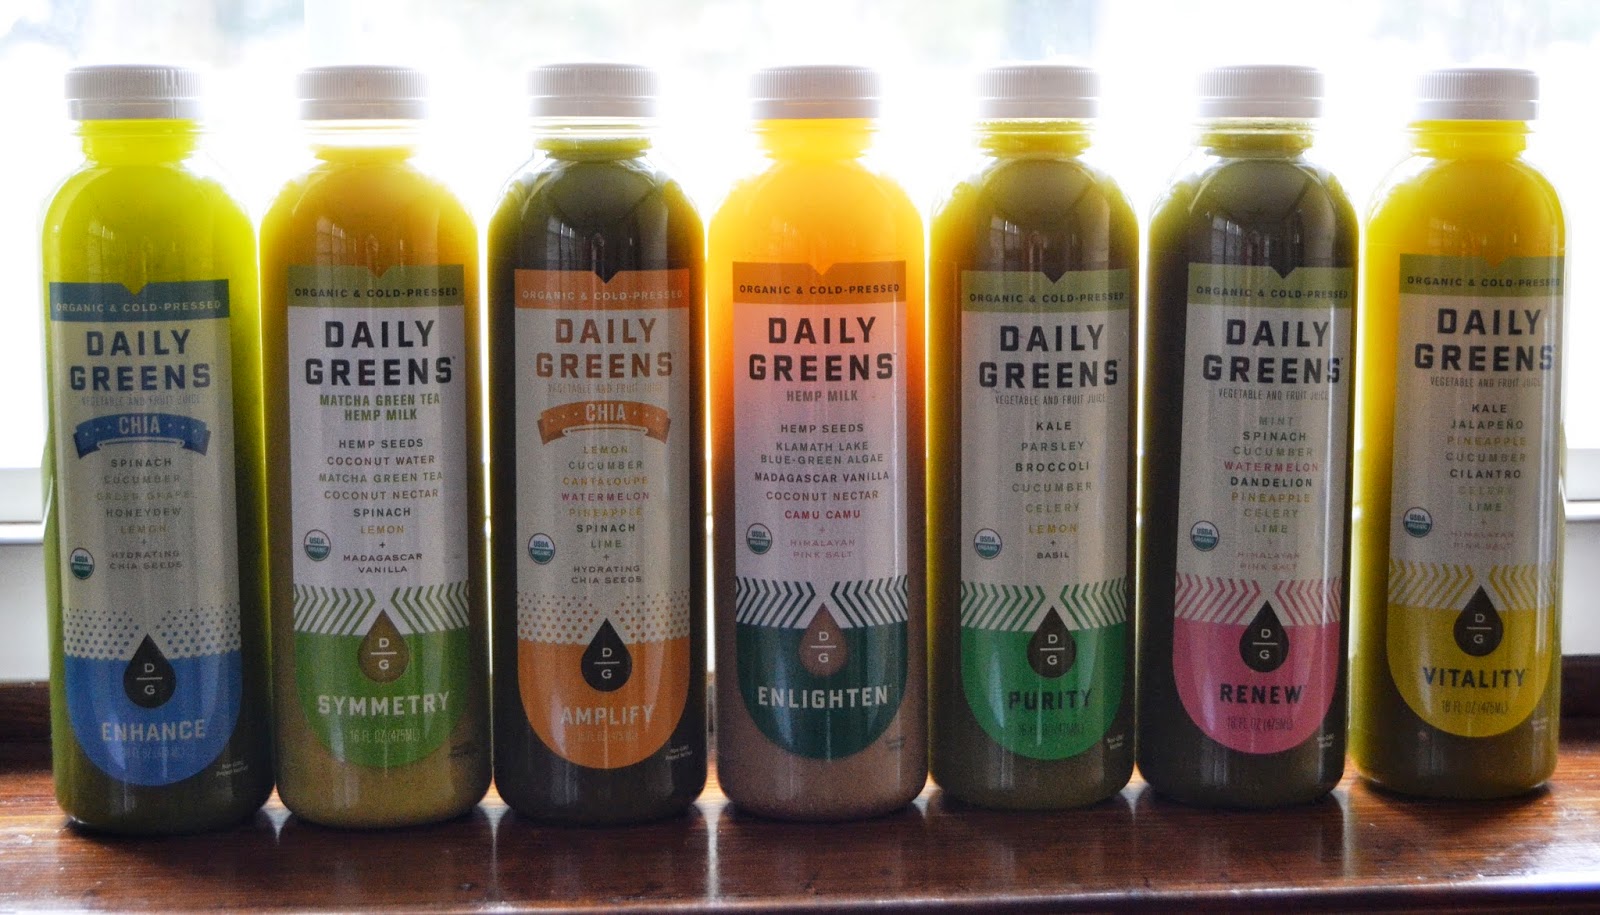 Daily Greens juices